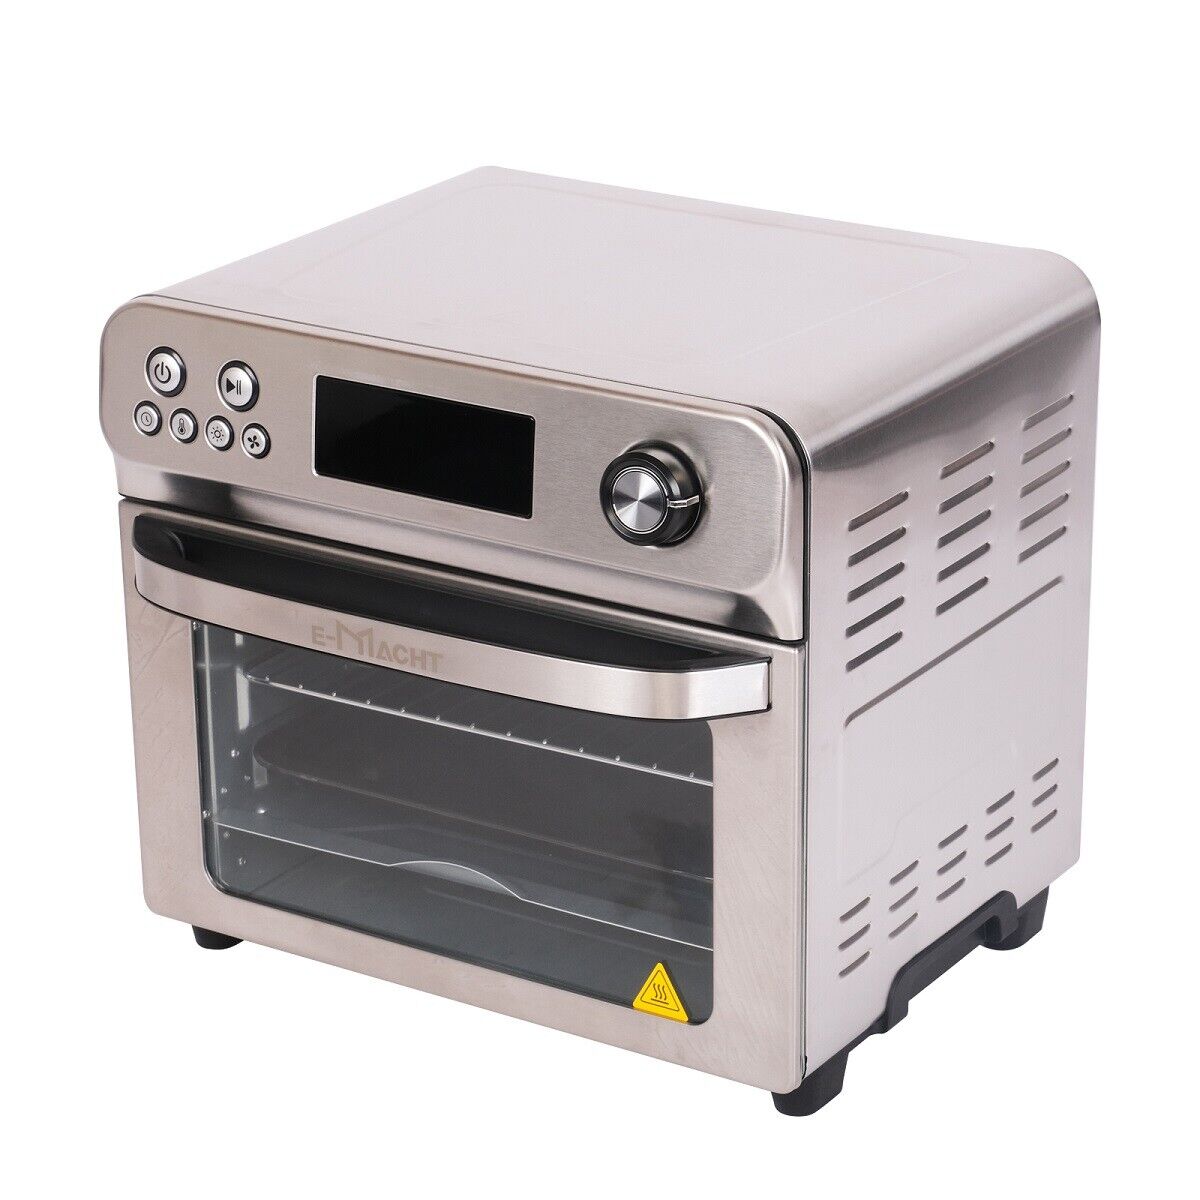 Air Fryer Toaster Oven, 24 QT 10-In-1 Convection Countertop Oven Combination w/ 6 Accessories, Stainless Steel Finish, 1700W